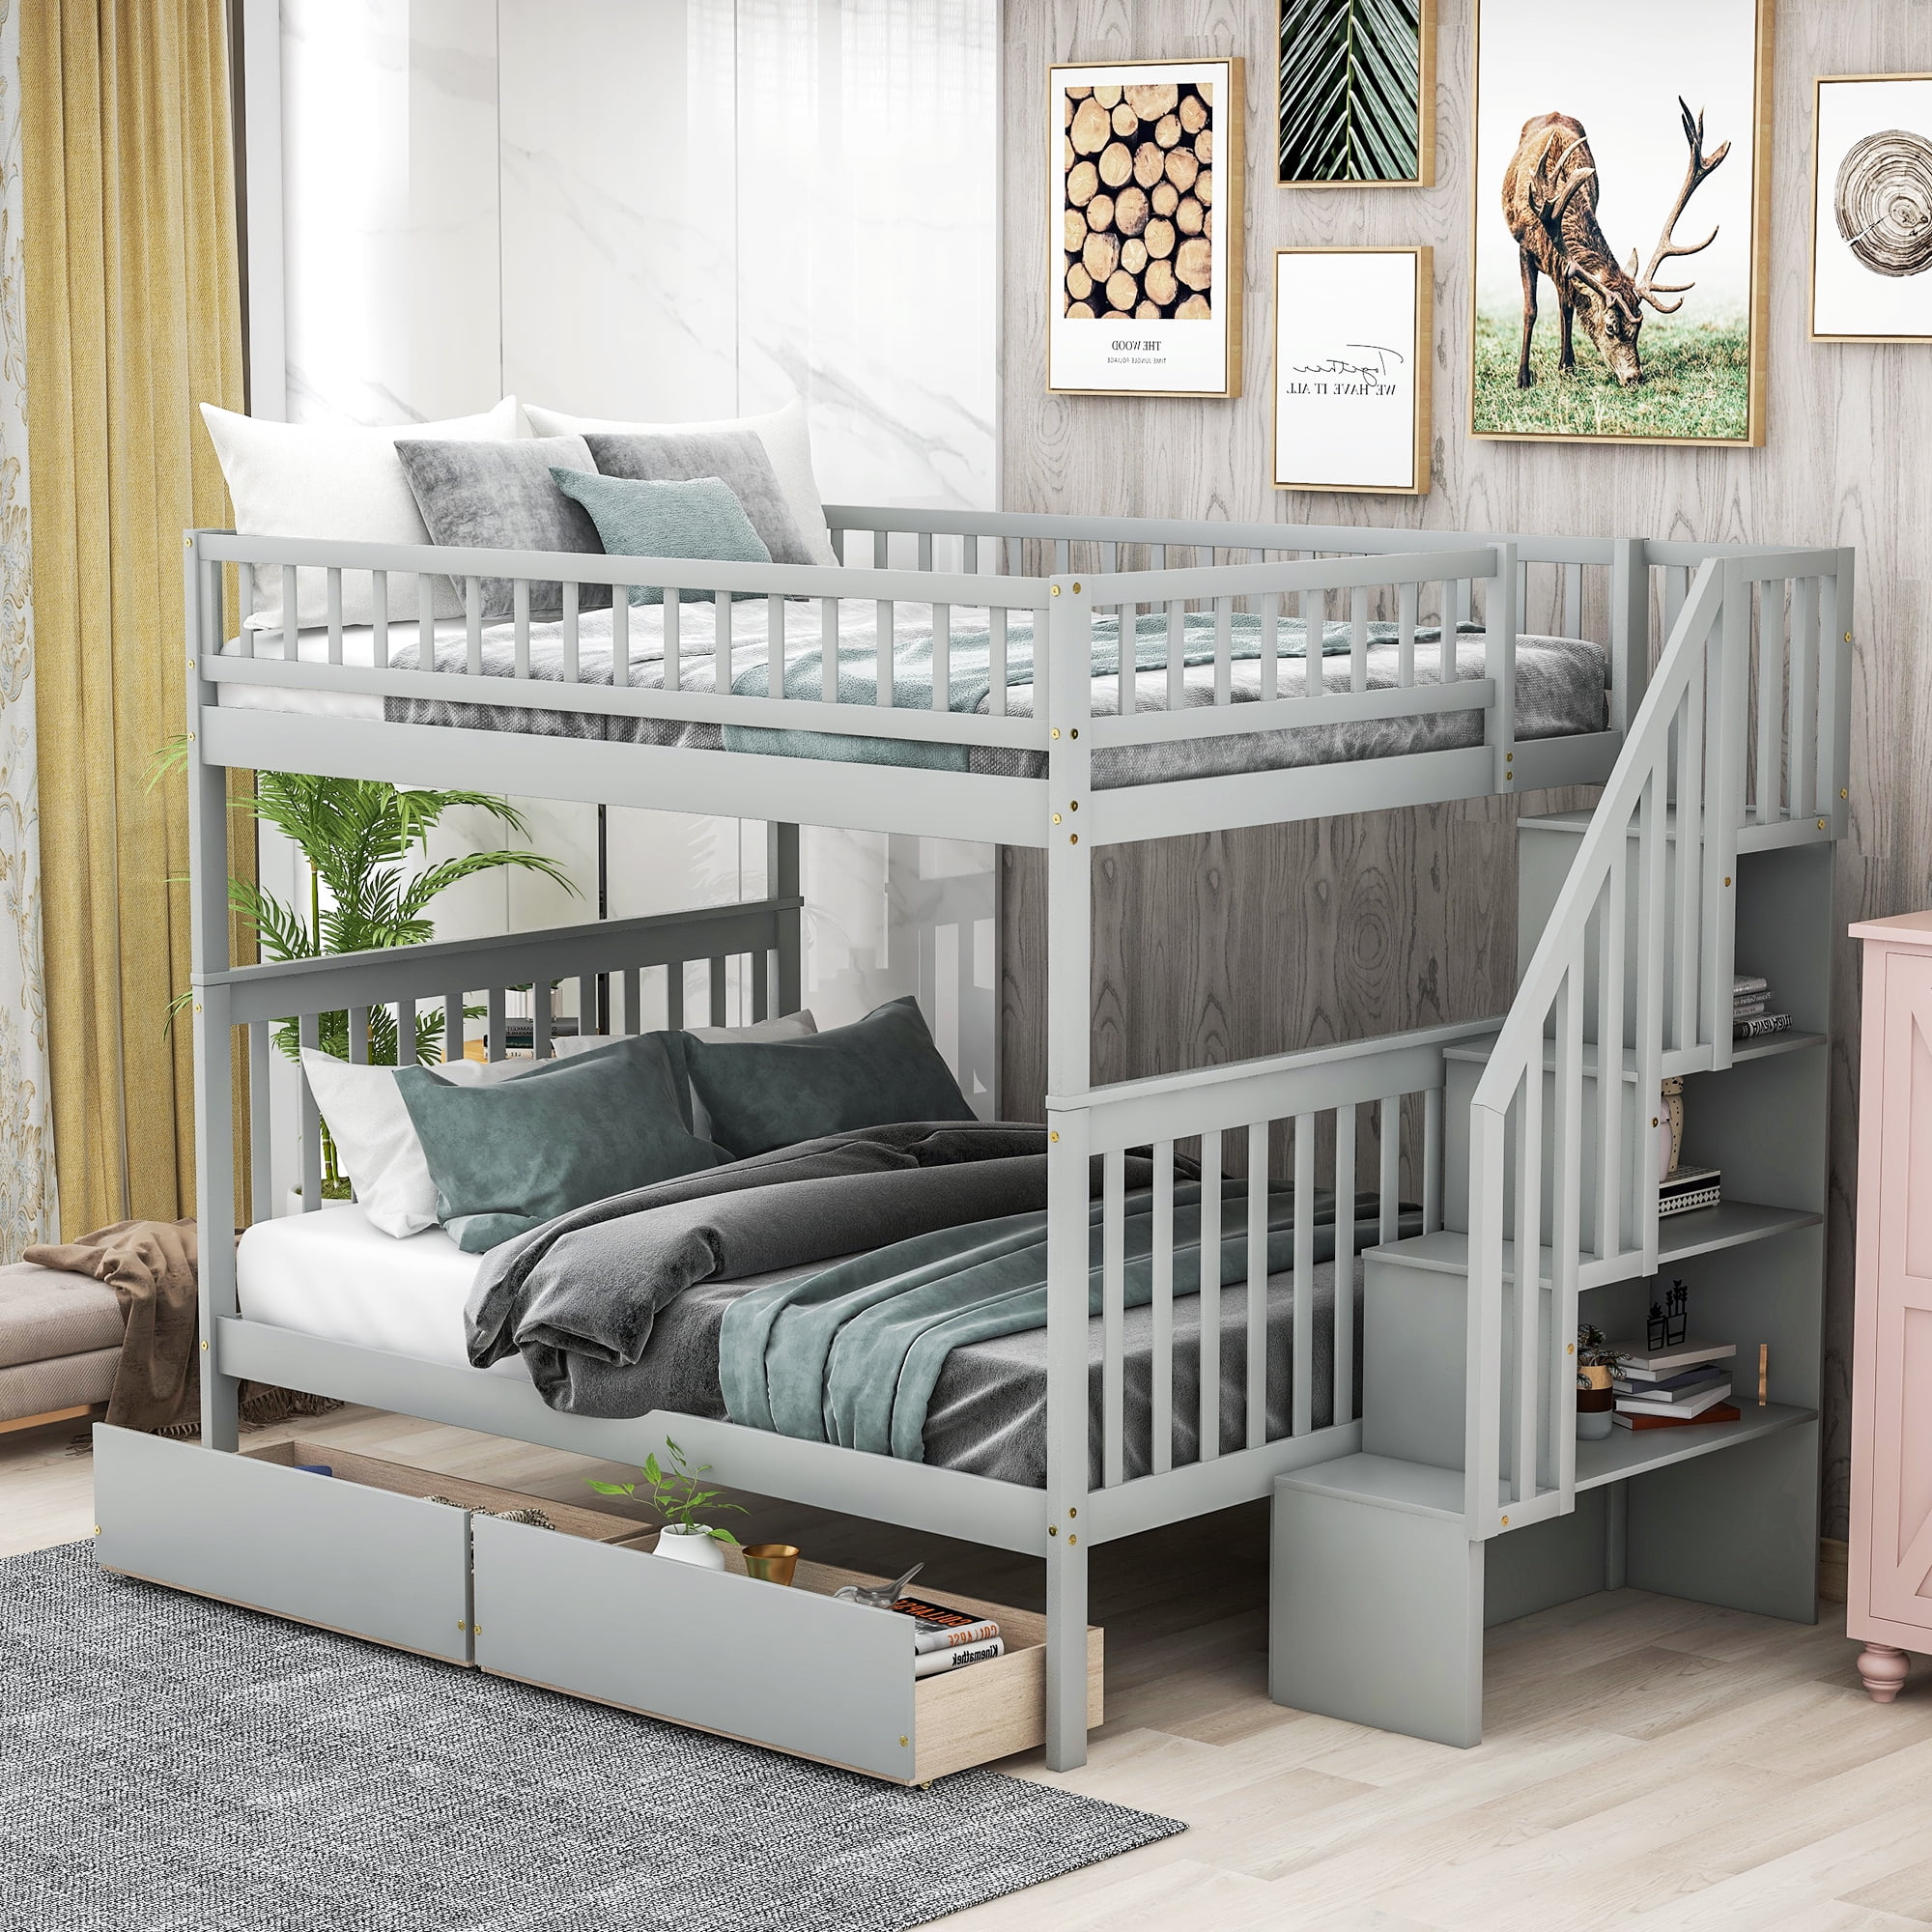 Euroco Full Over Bunk Bed With, Bunk Bed With Under Storage